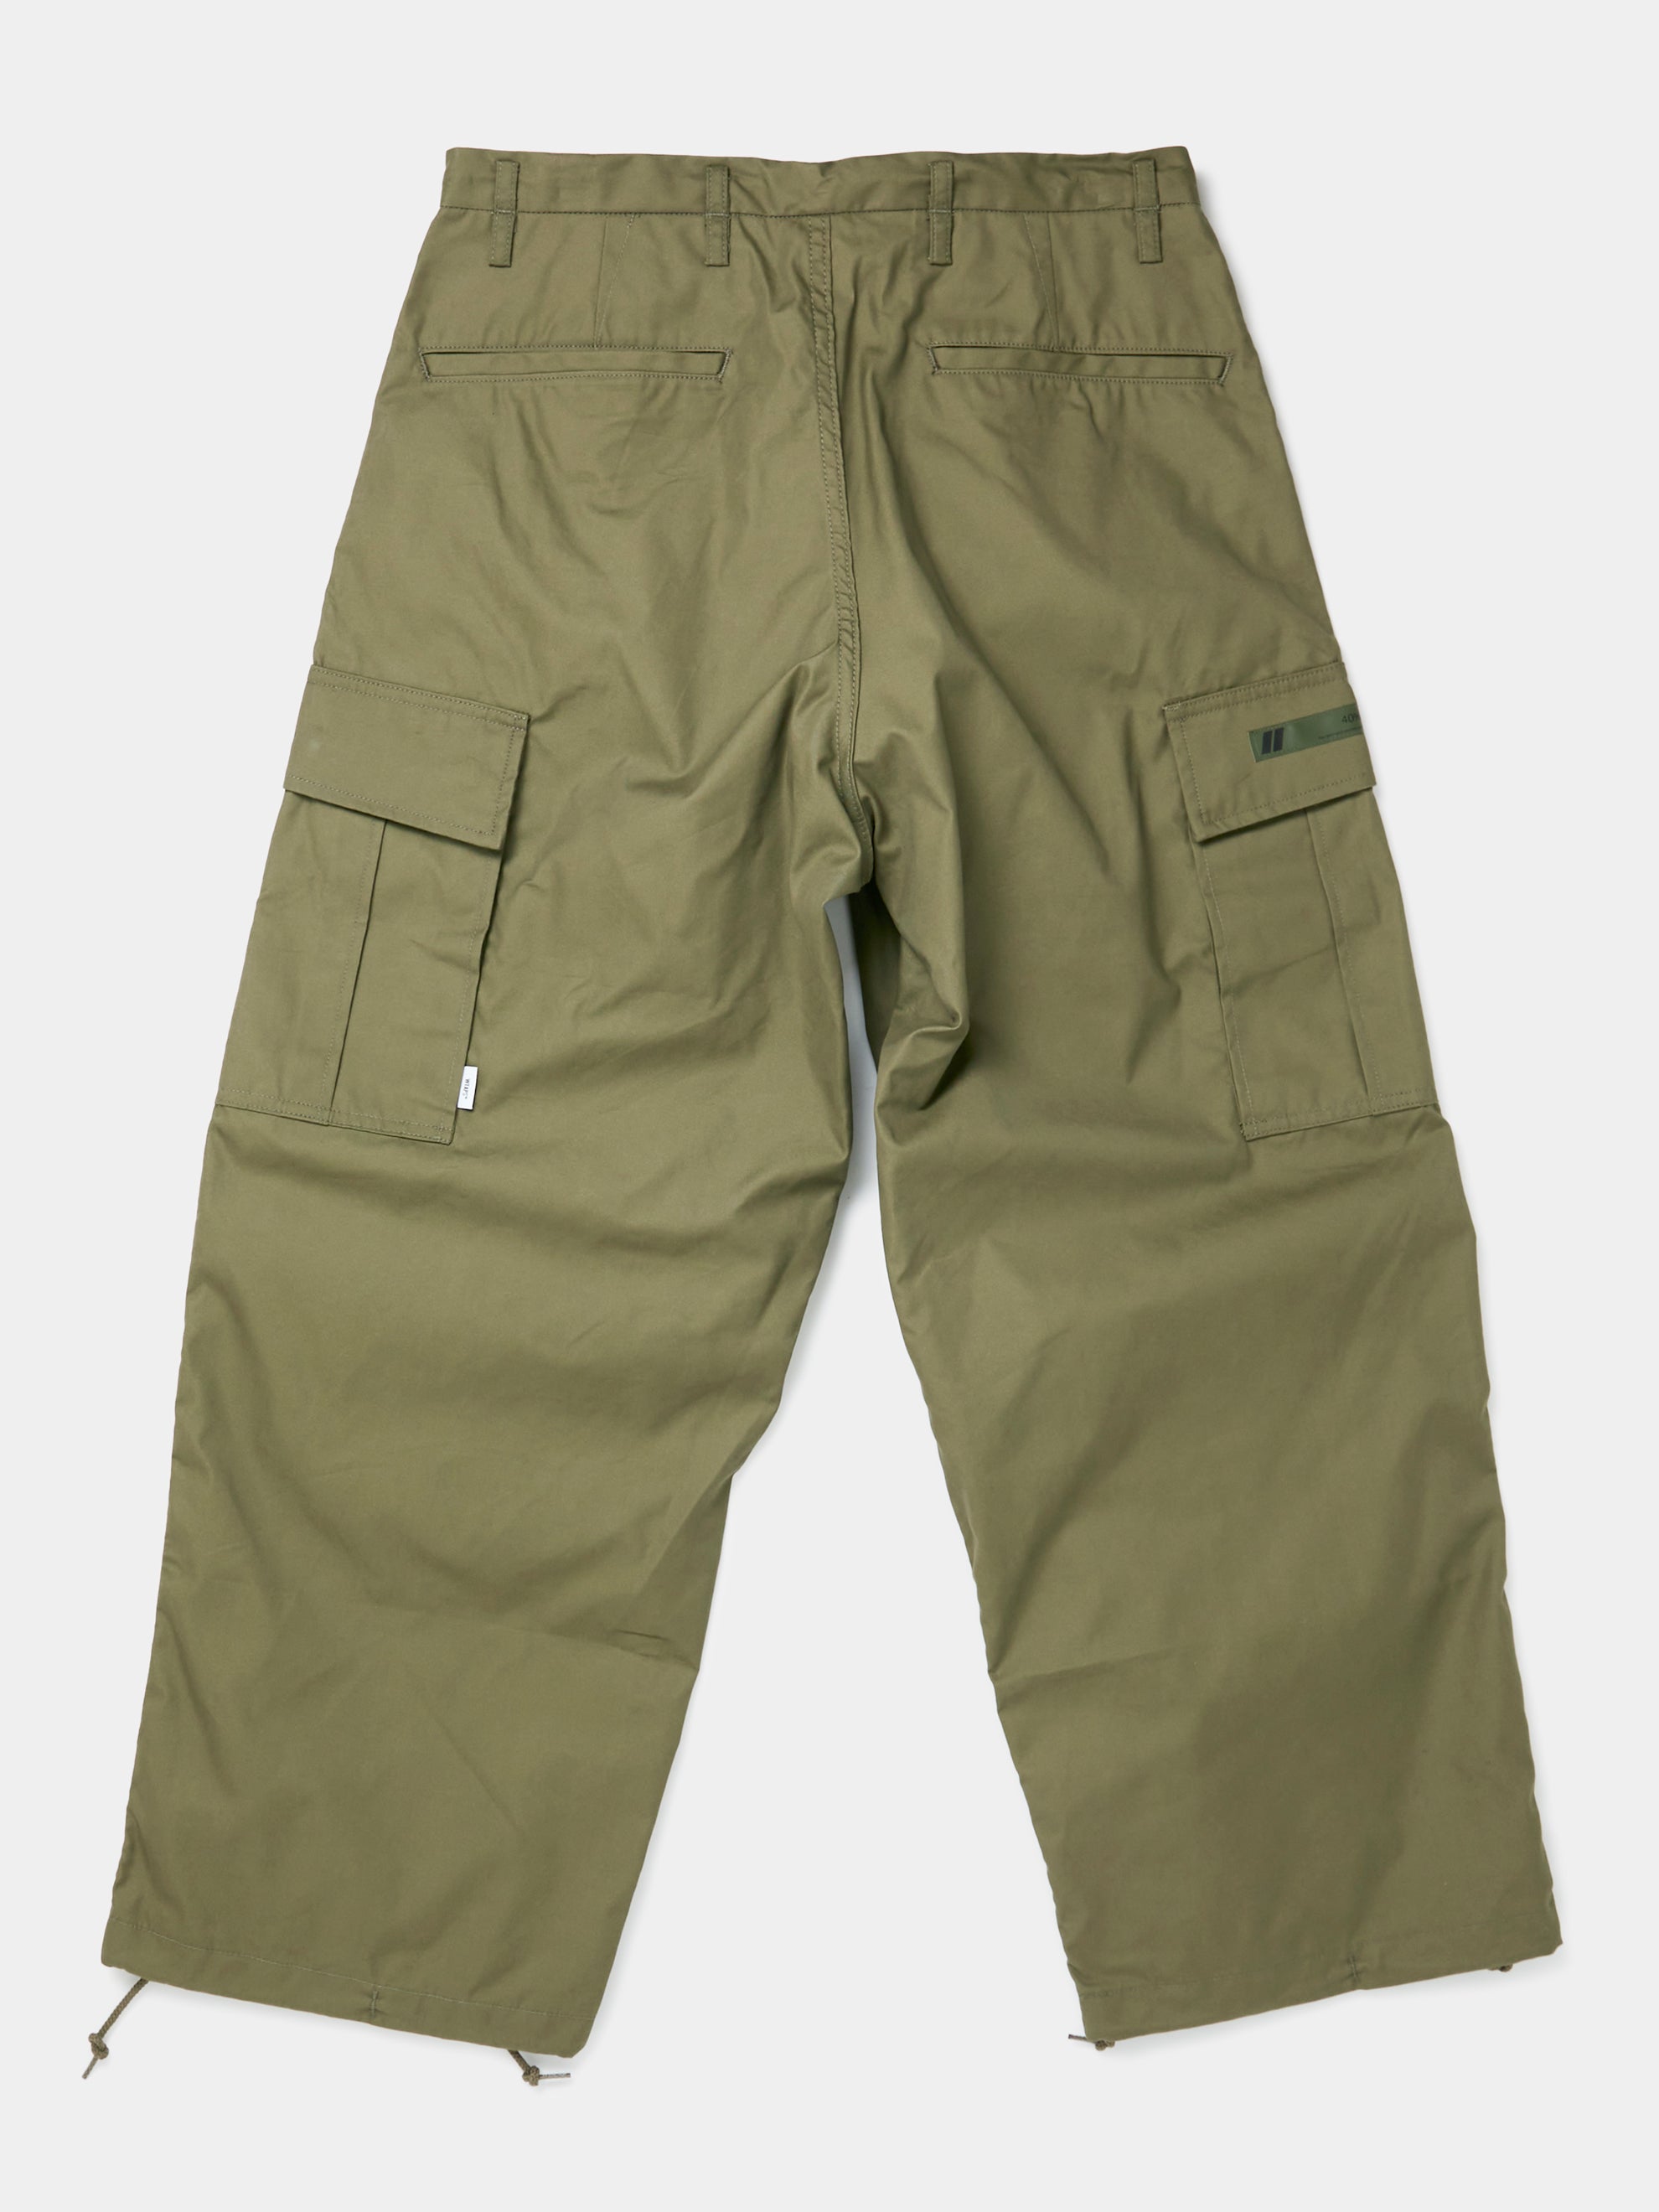 Buy Wtaps MILT0001 / TROUSERS / NYCO. (Olive Drab) Online at UNION